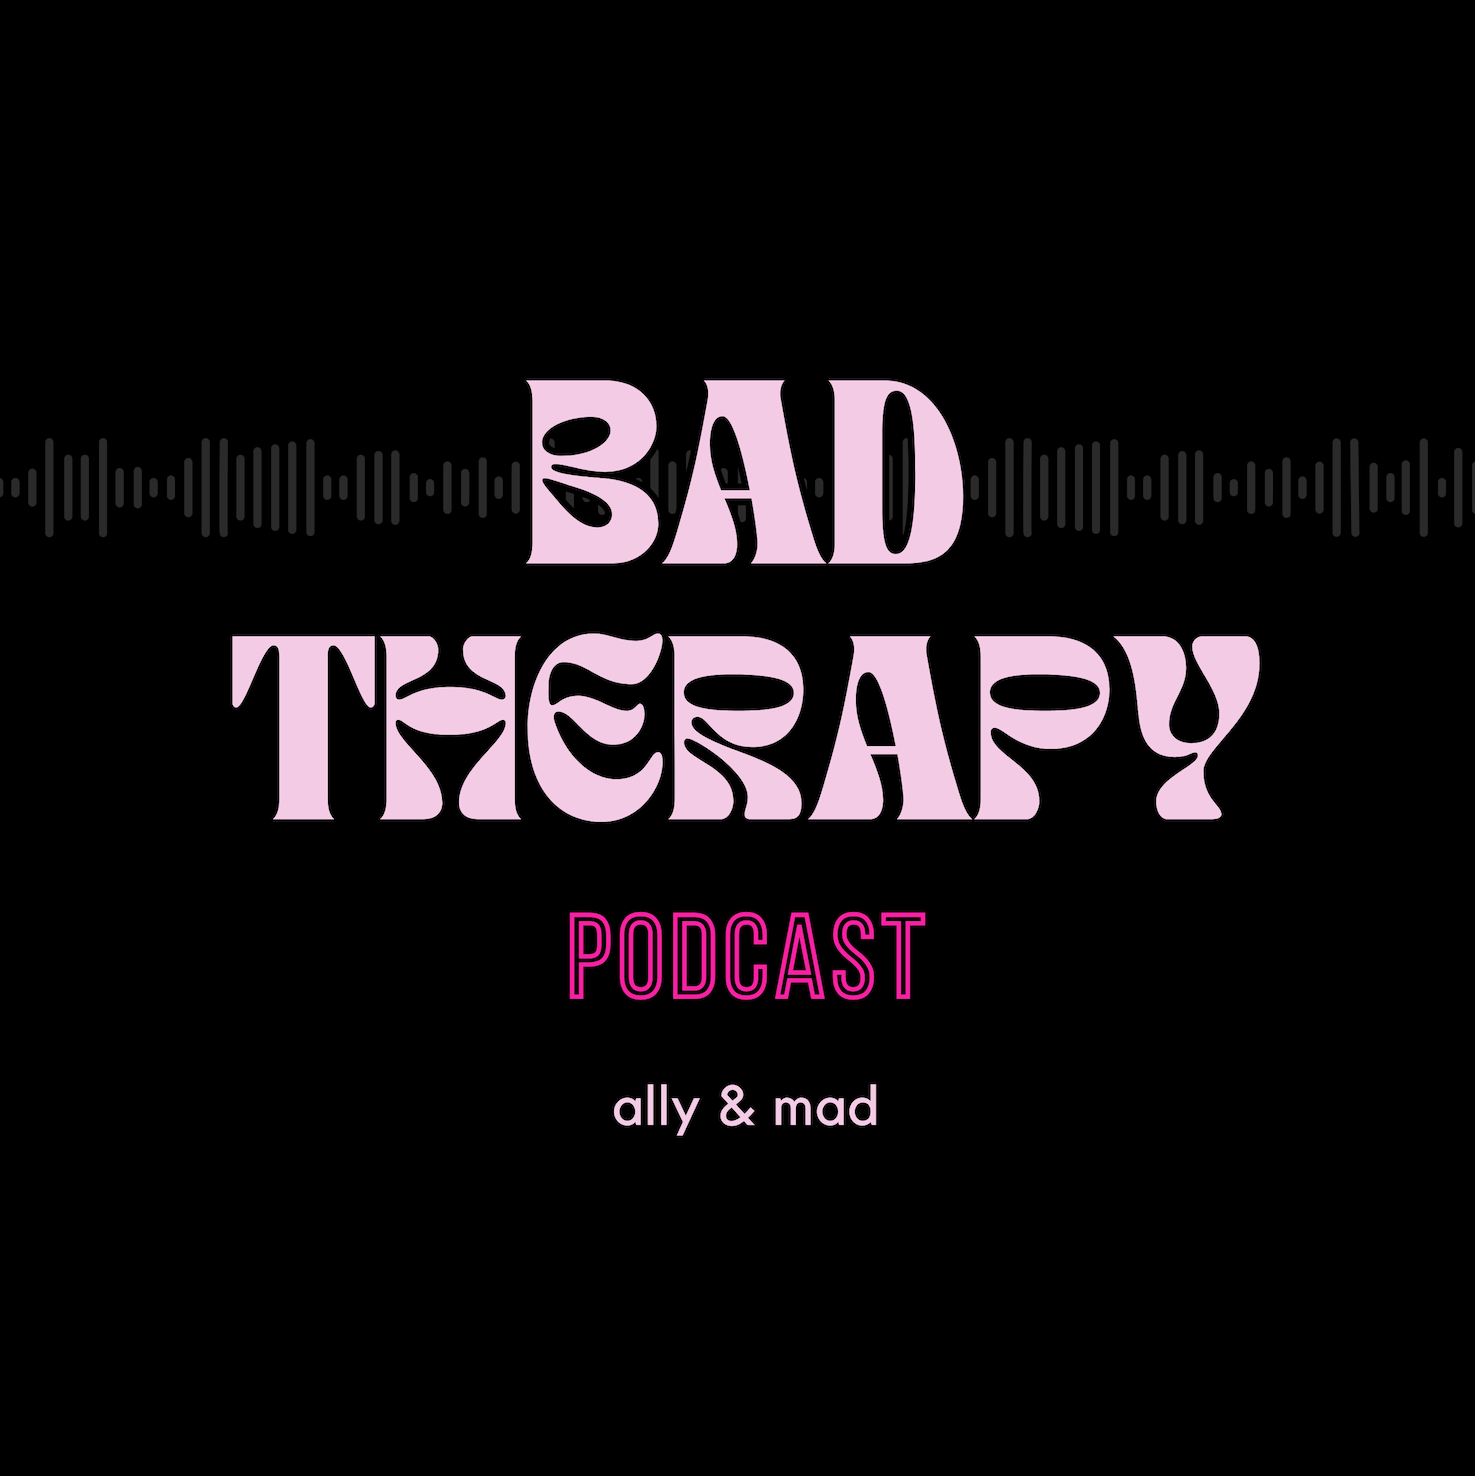 OUR WILDEST STORIES | Parties, Cops, Peeping Toms, Crazy Girlfriends, Rumors | BAD THERAPY - EP. 8